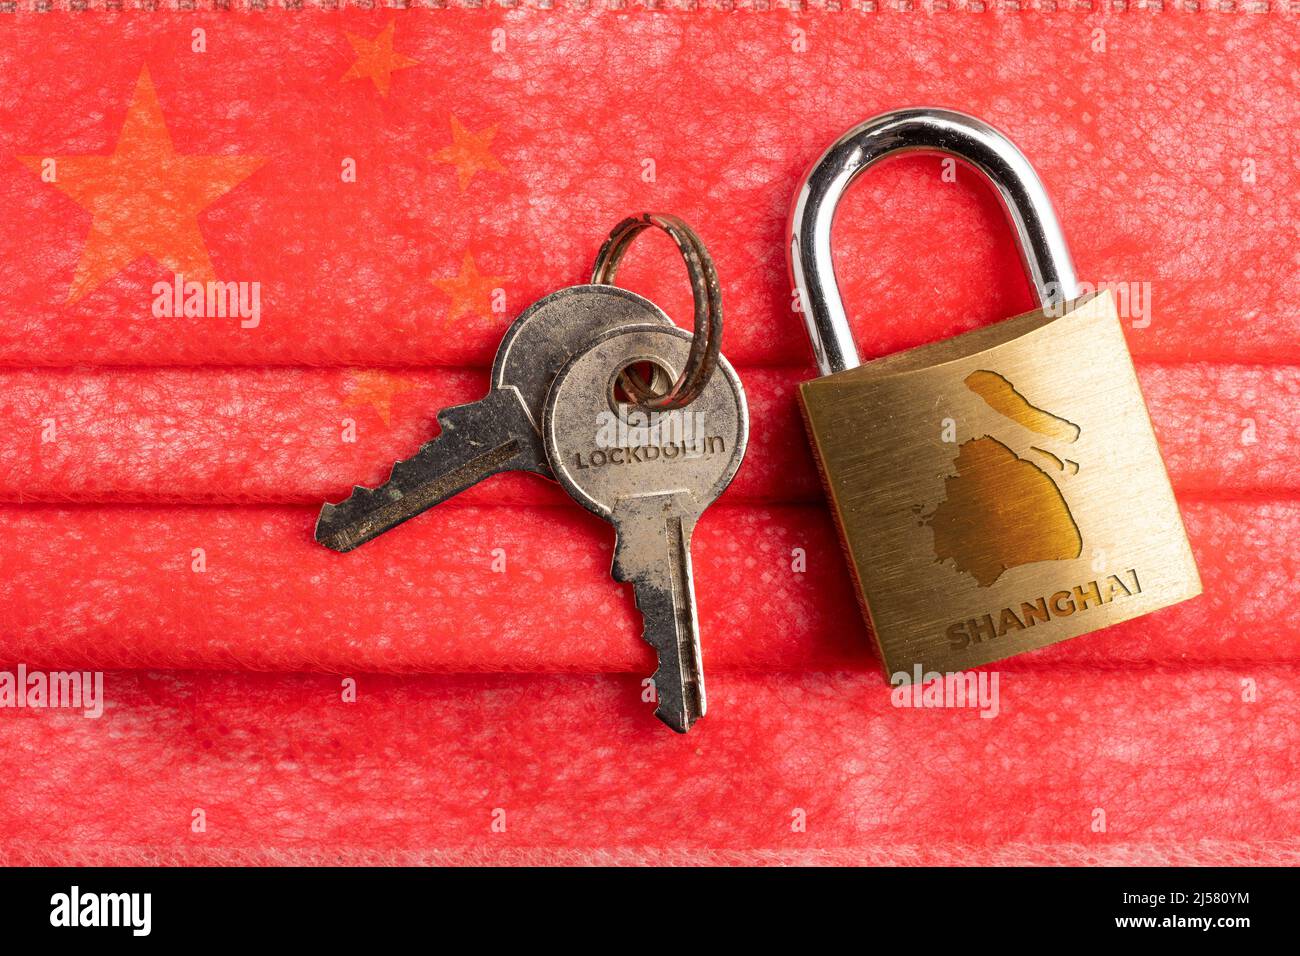 Shanghai lockdown: a lock with a Shanghai map and the word lockdown engraved on a pair of key over a surgical mask with chinese flag Stock Photo